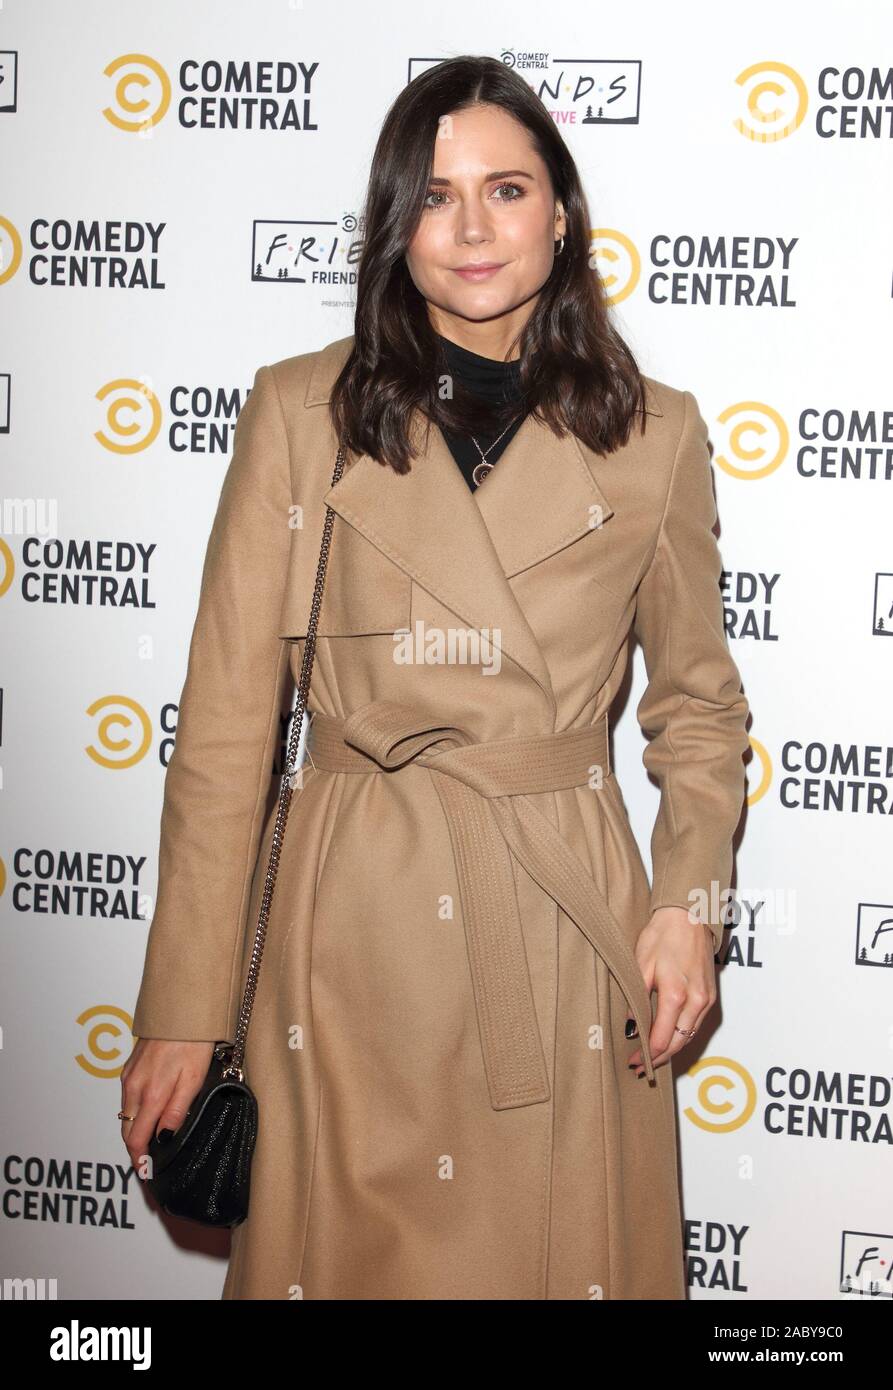 LONDON, UNITED KINGDOM - NOVEMBER 28 2019: Lilah Parsons attends the Comedy Central Friends Festive Exhibition launch at The Truman Brewery in London. Stock Photo